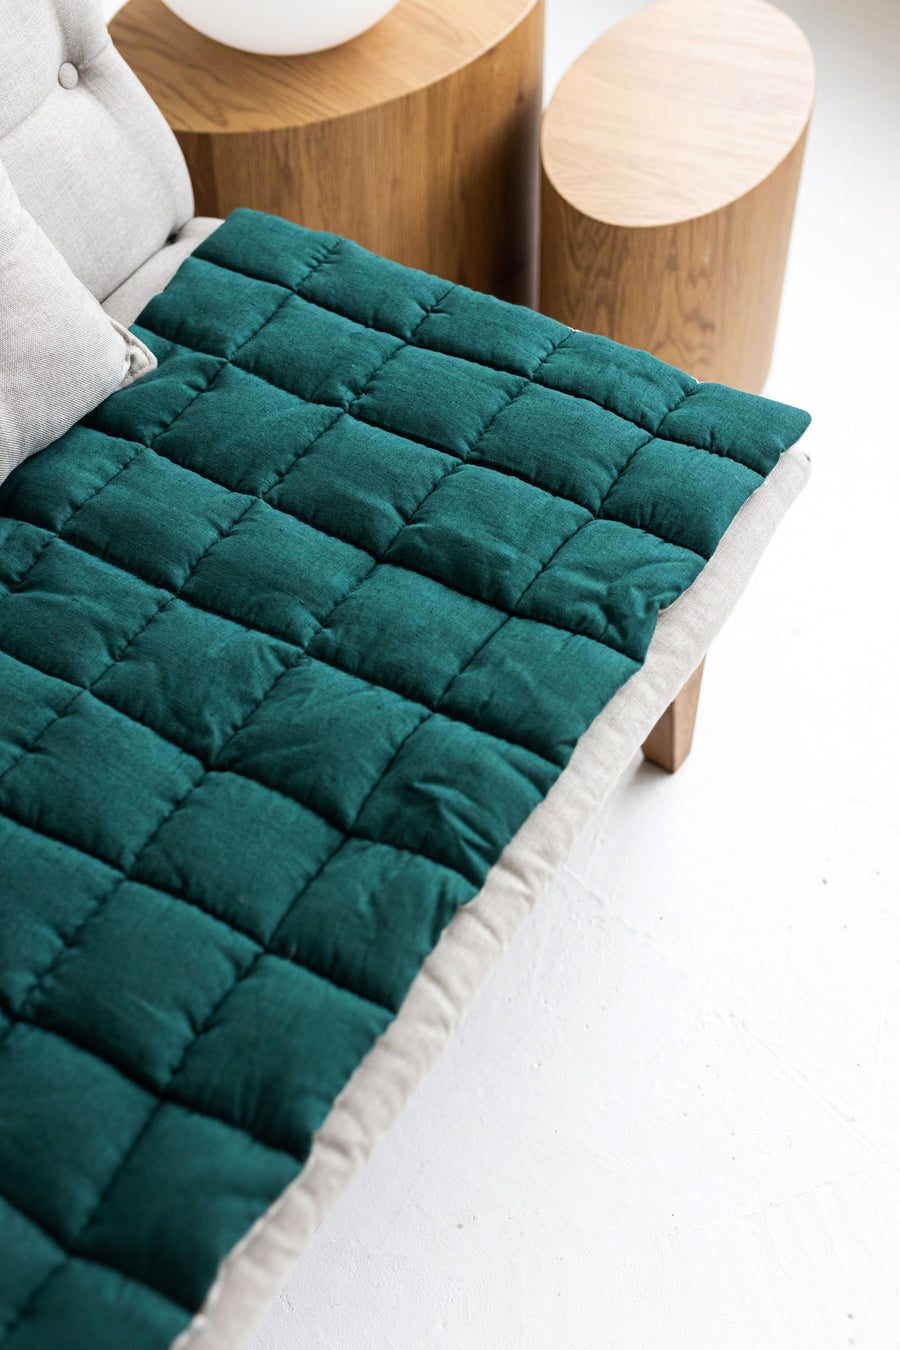 Two-sided Emerald Linen Couch Mat